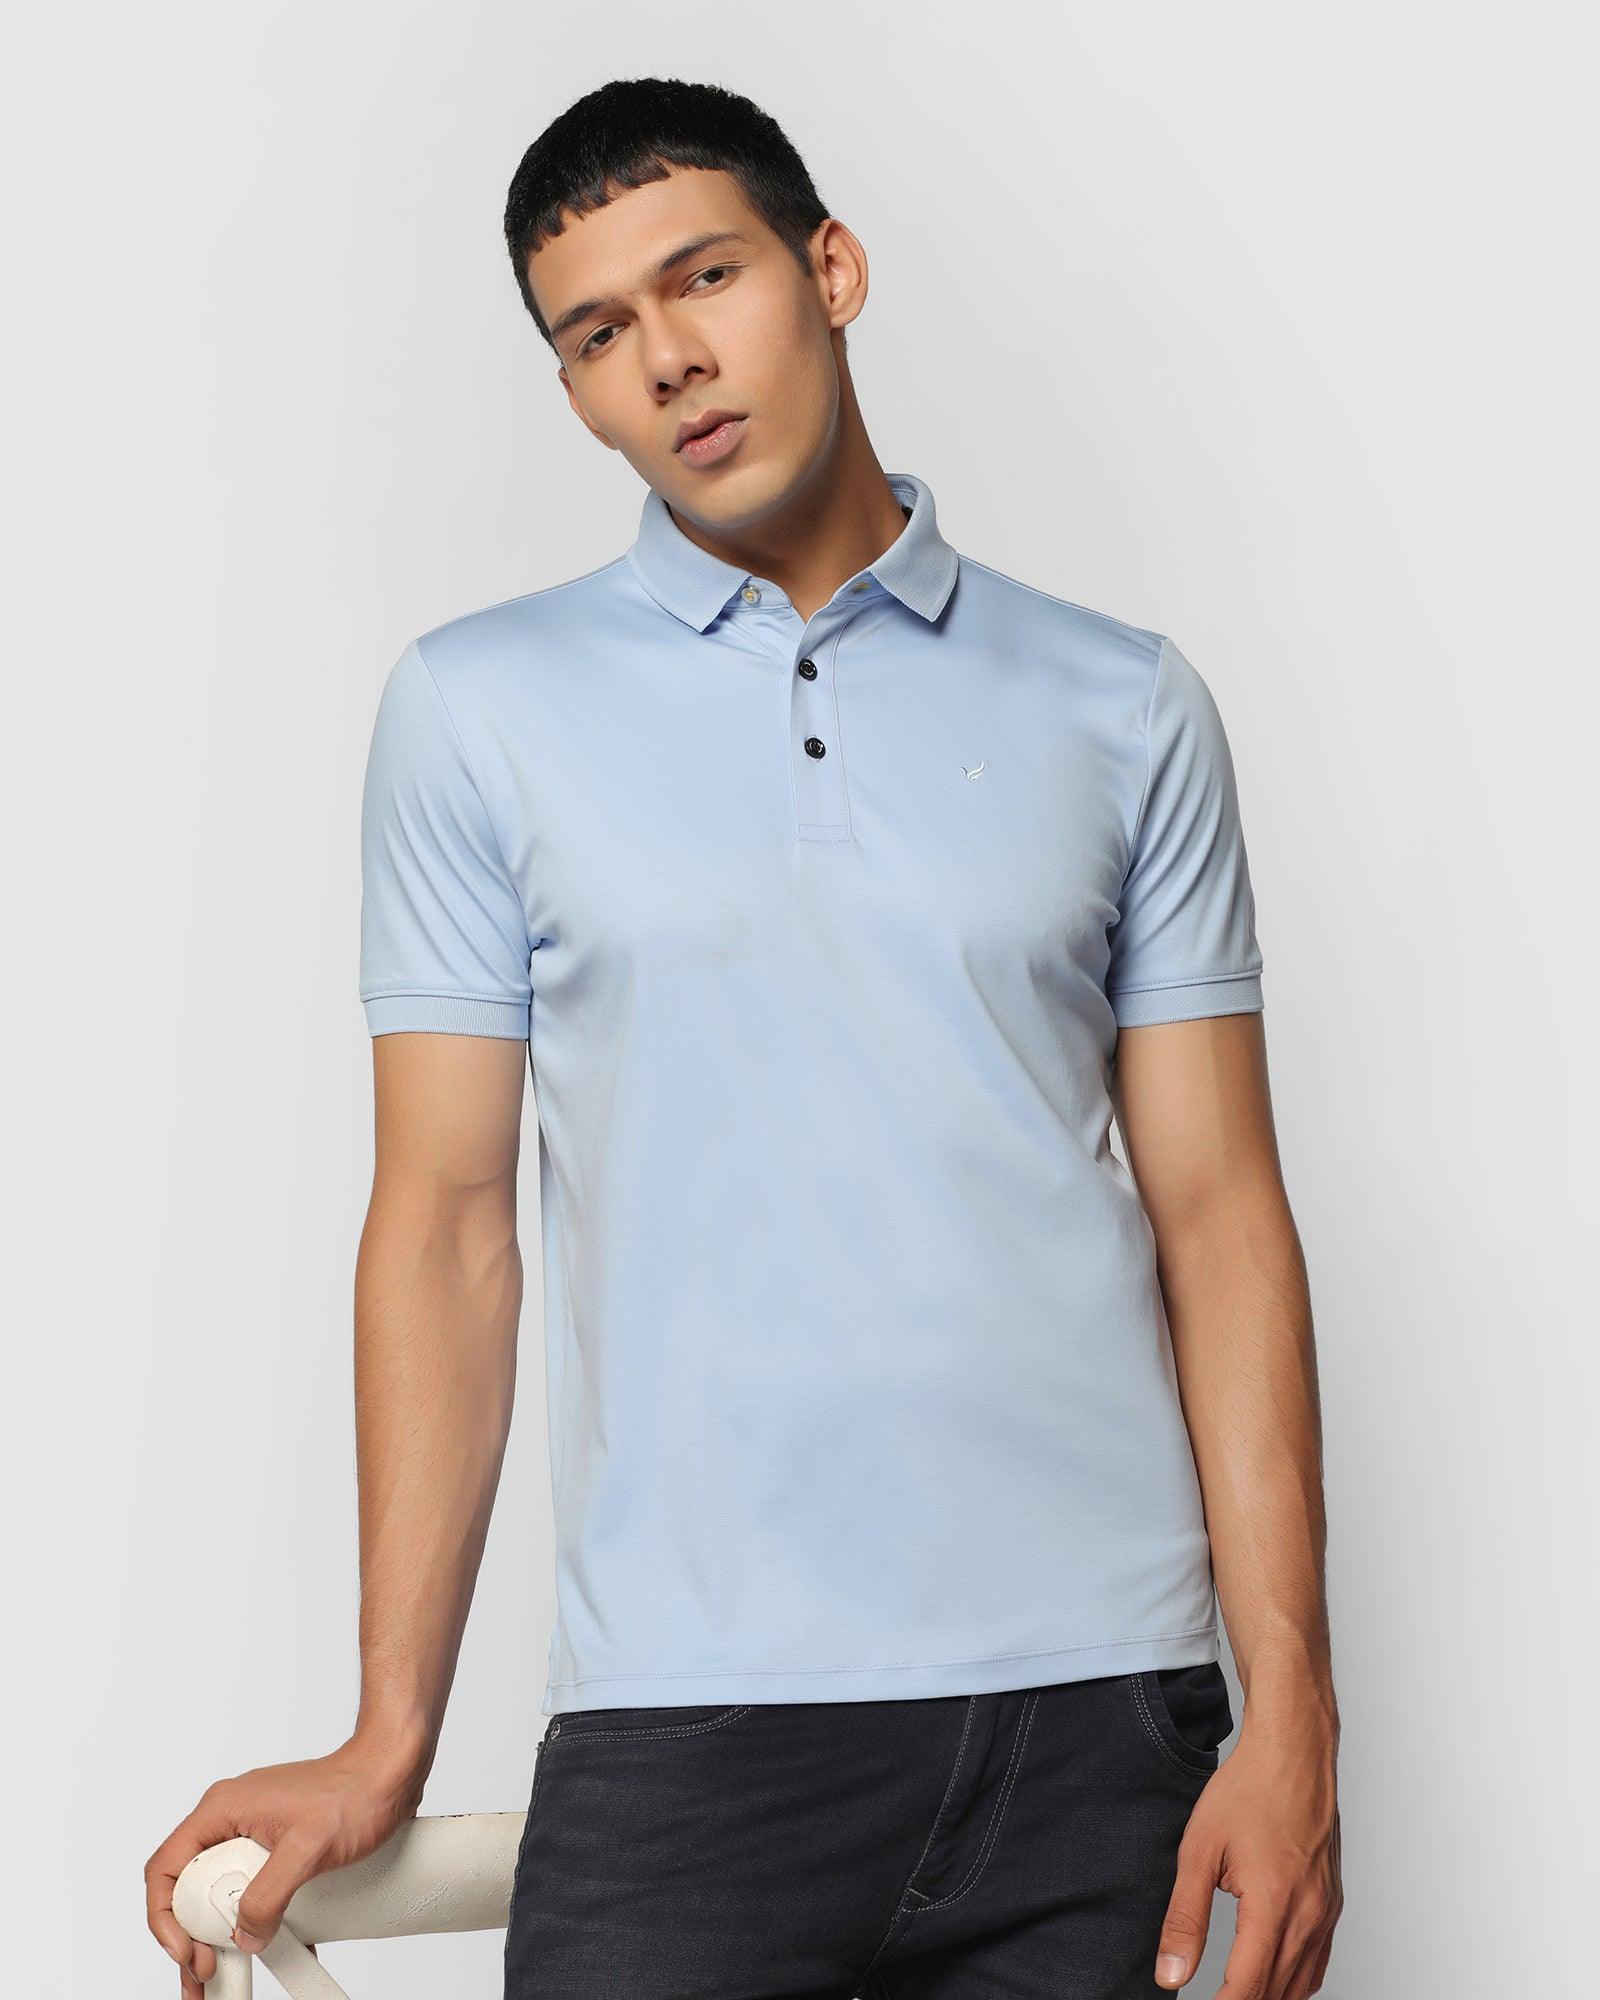 Polo Light Blue Solid T Shirt - Toll